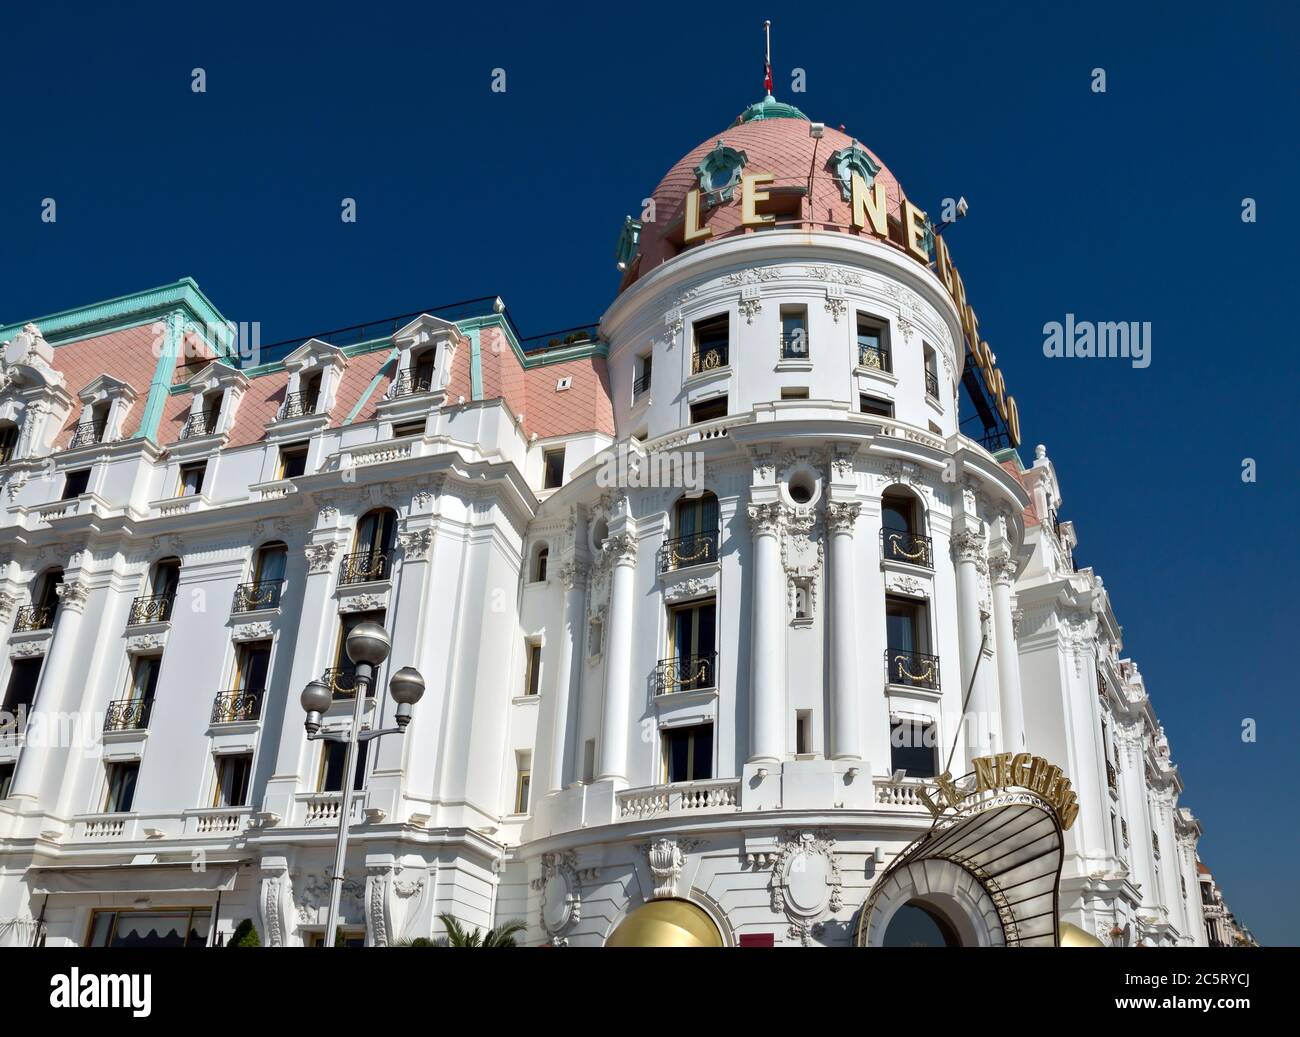 NICE, FRANCE - MAY 4: Luxury Hotel Negresco on May 4, 2013 in Nice, France. Hotel Negresco is the famous luxury hotel on the Promenade des Anglais in Stock Photo